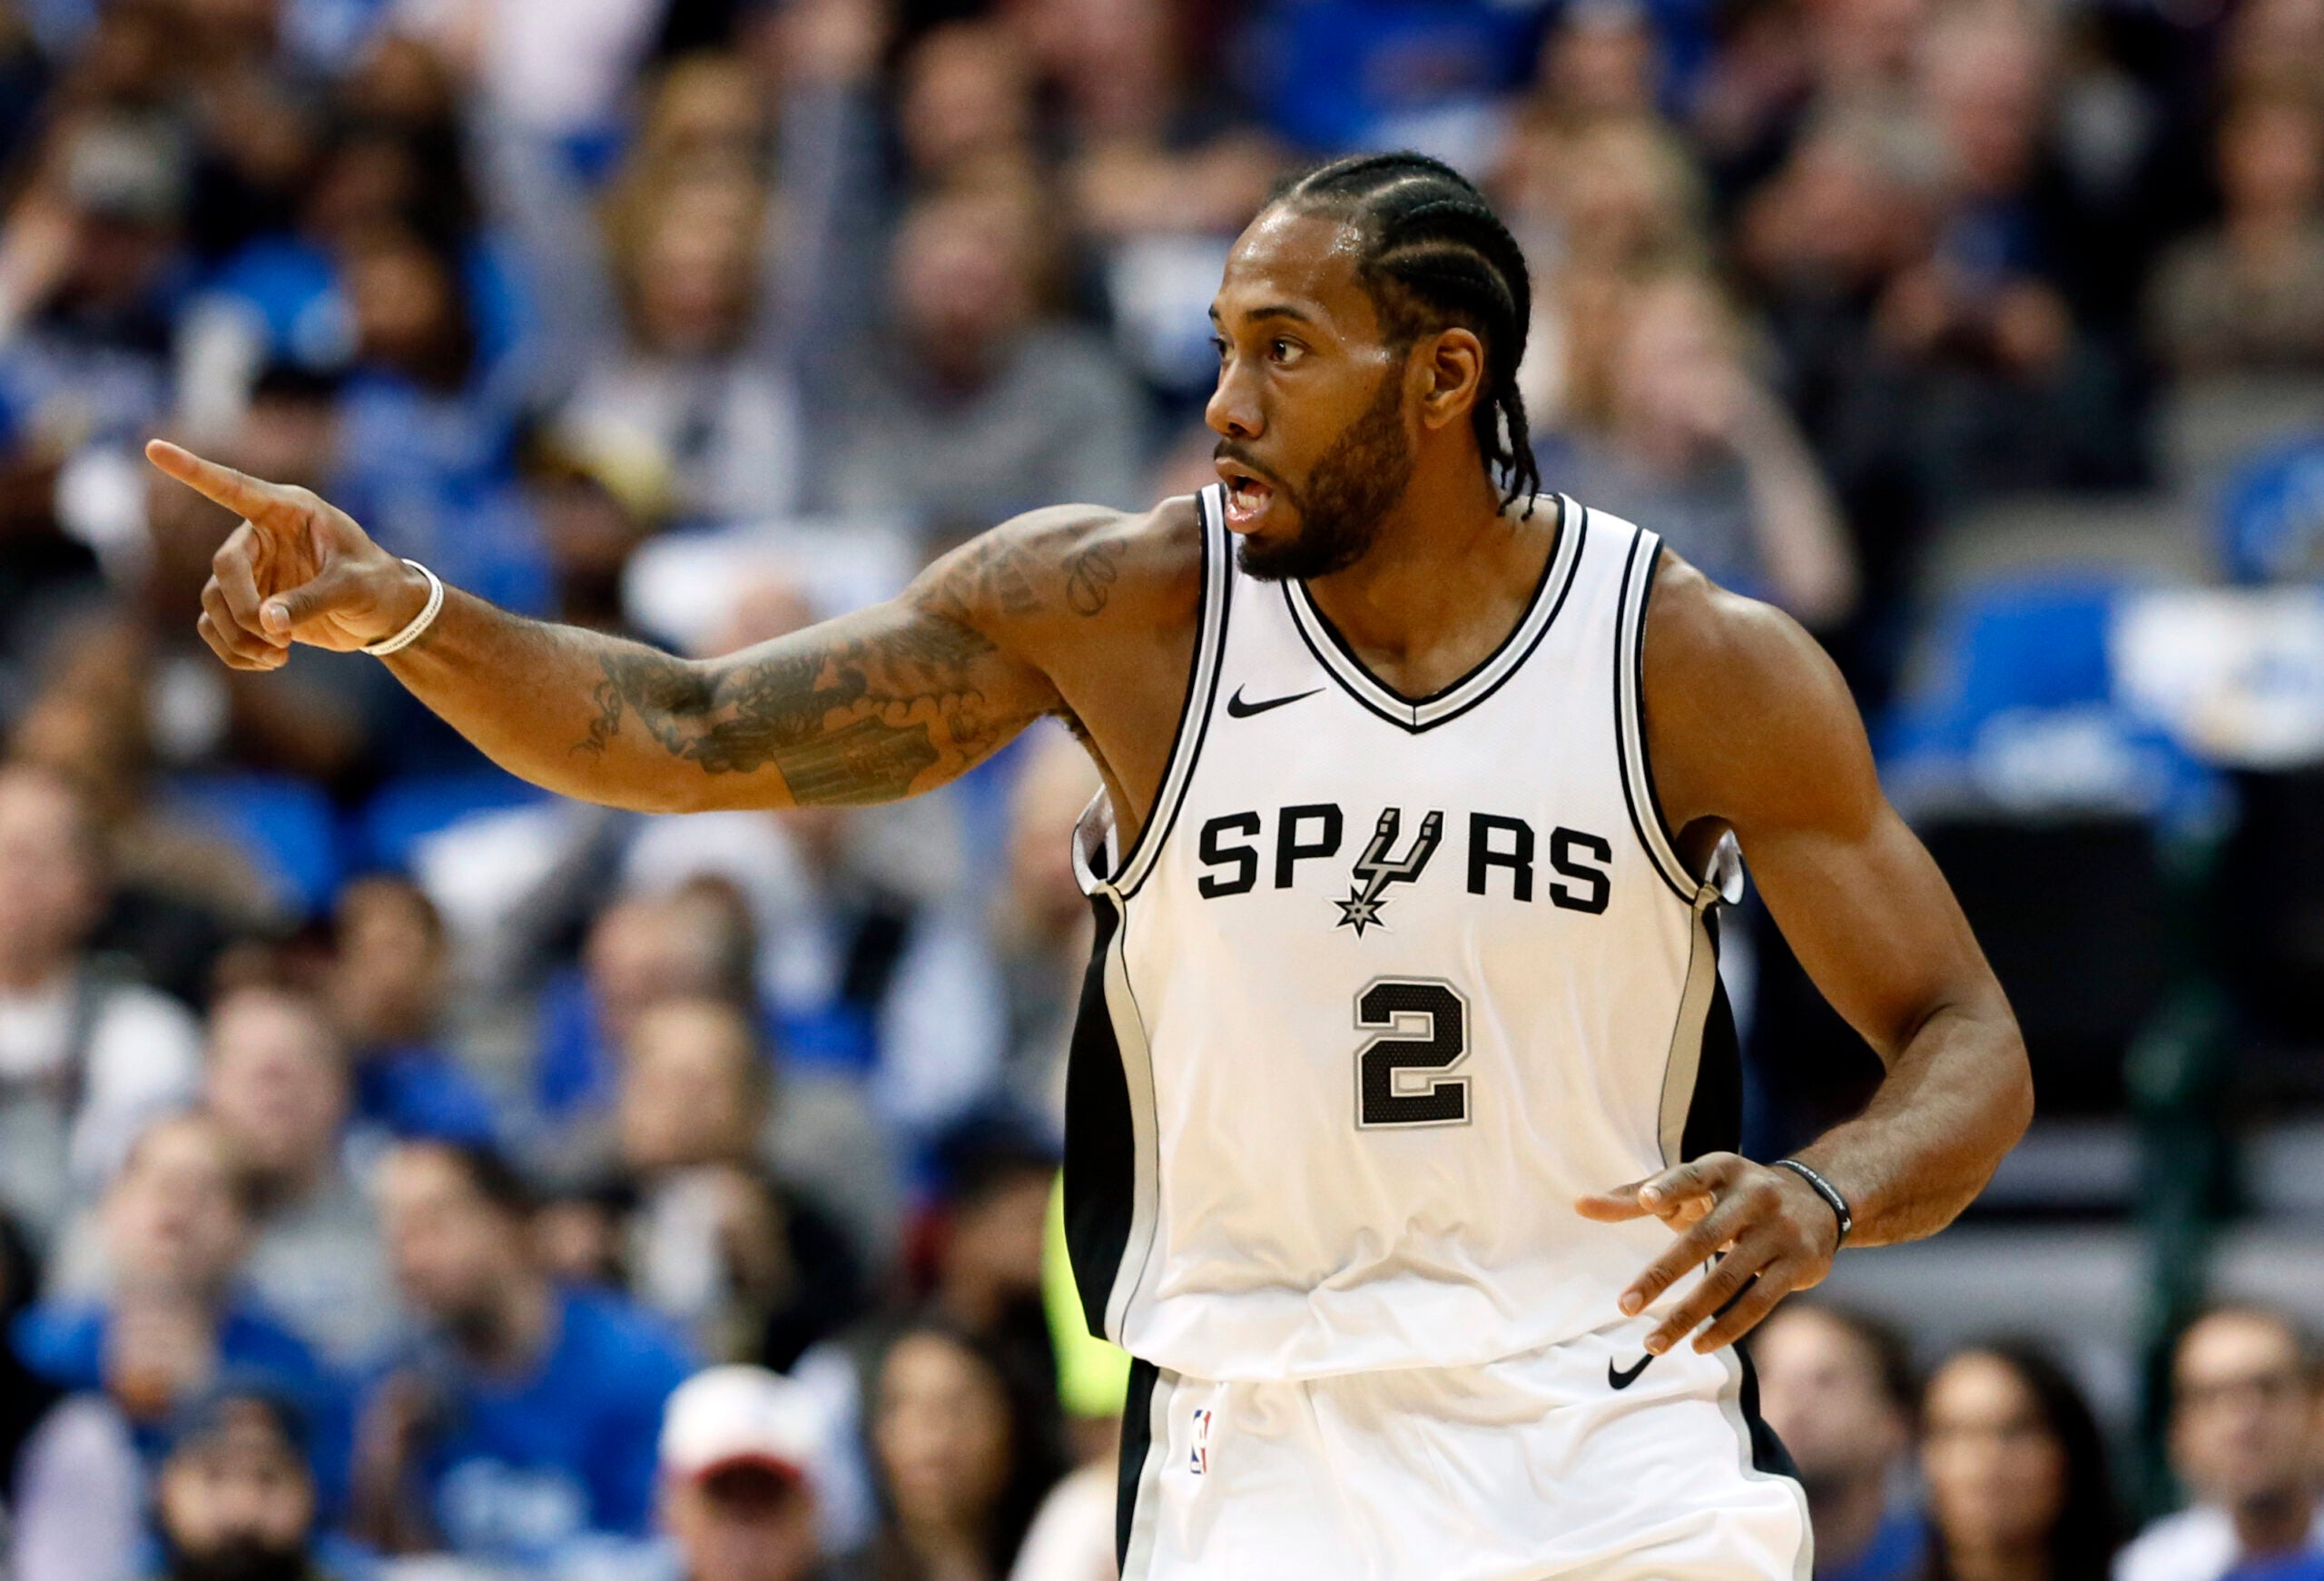 The story behind Kawhi Leonard's missing Defensive Player of the Year vote